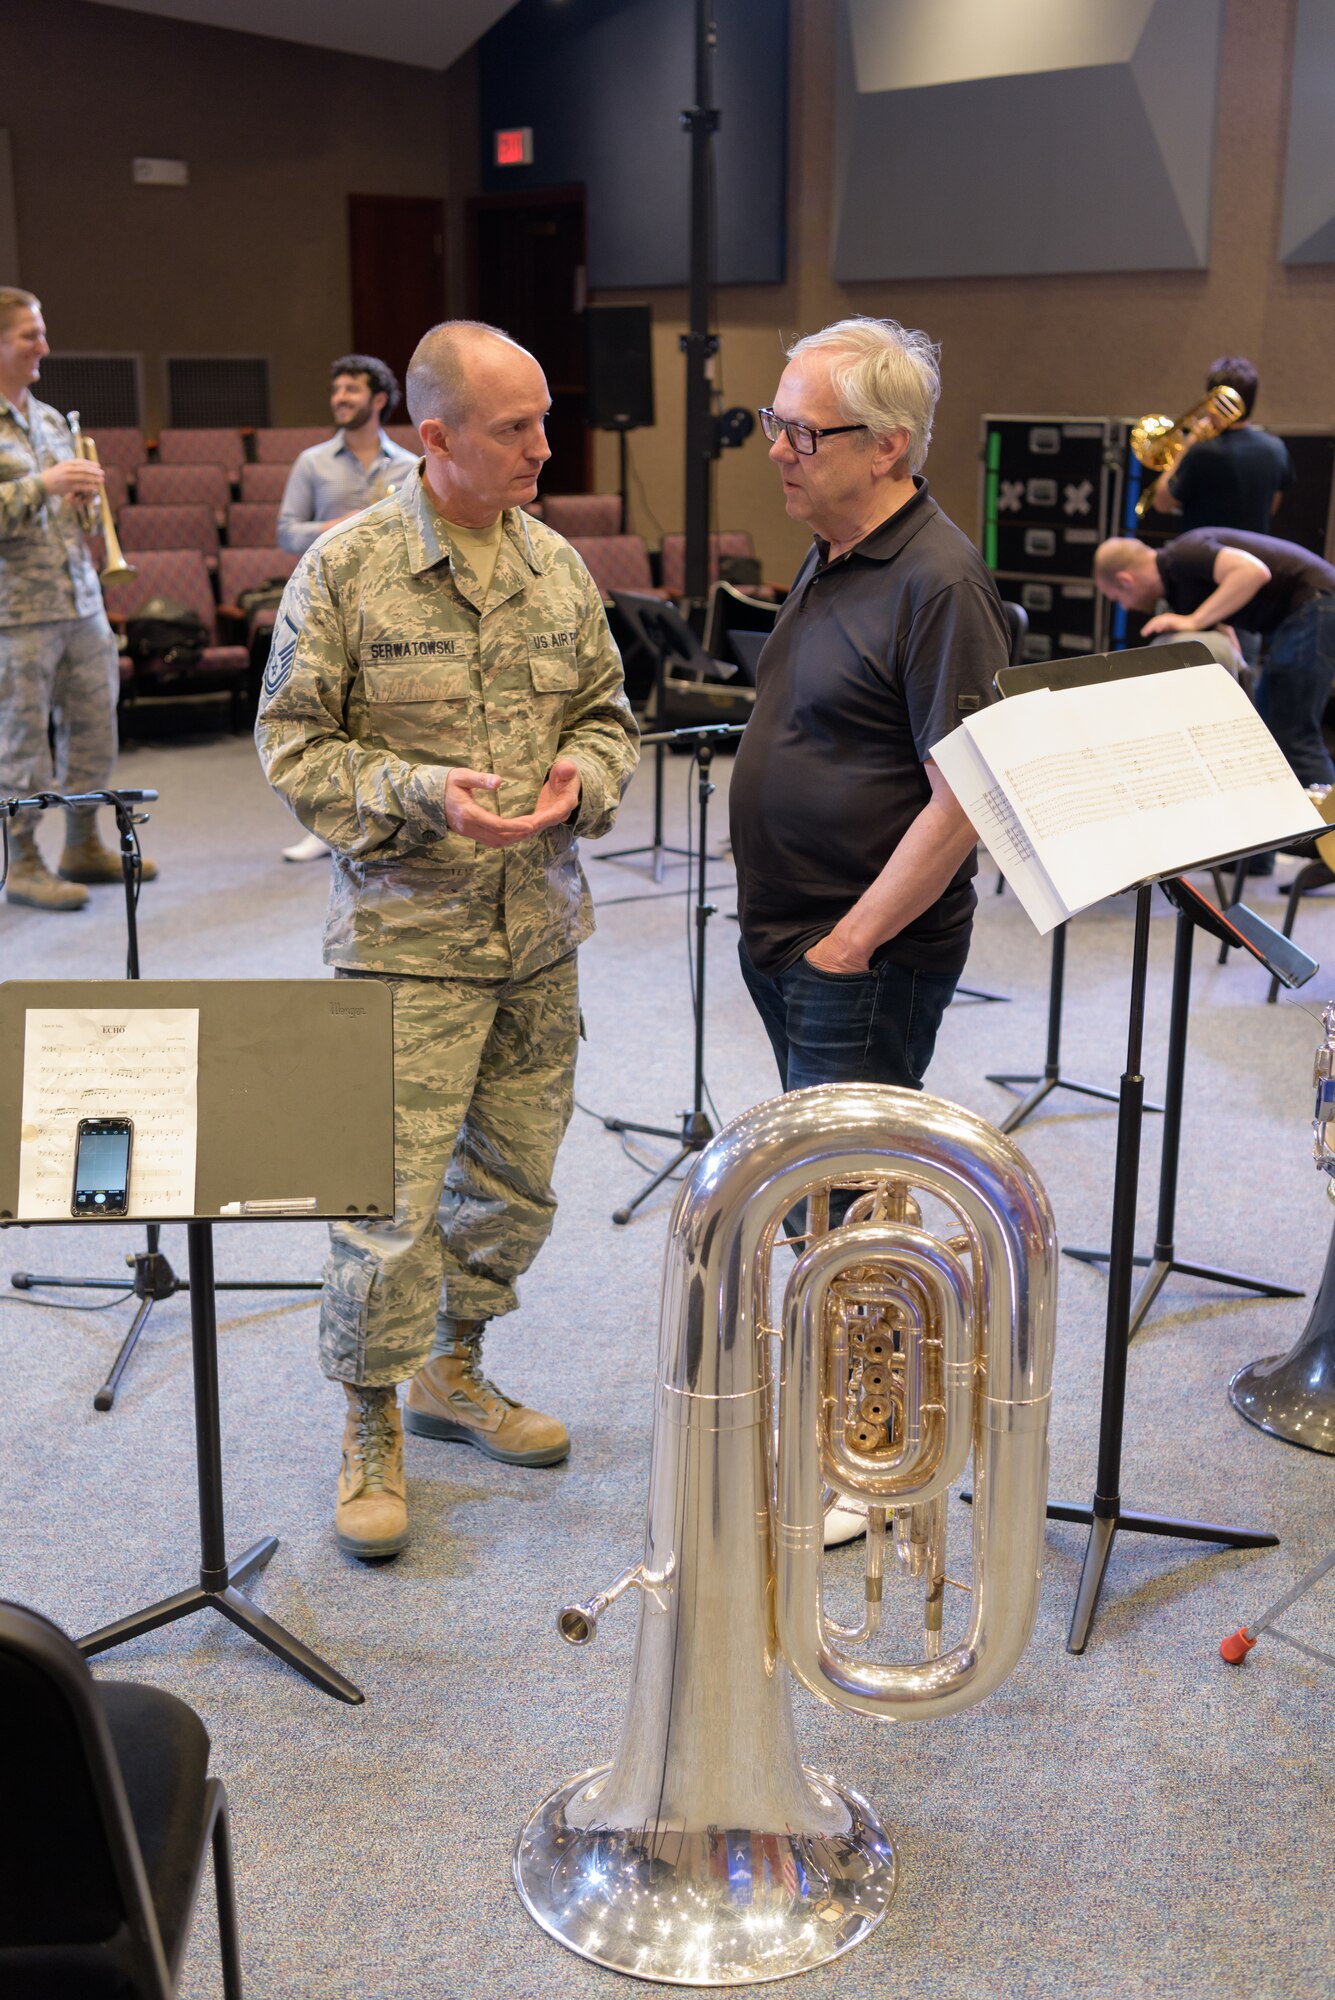 U.S. Air Force Master Sgt. Alex Serwatowski, Heartland of America Band section chief of publicity and tuba player, and Chuck Daellenbach, Canadian Brass tuba player, speak before their collaborative rehearsal June 8, 2018, at Offutt Air Force Base, Nebraska. Canadian Brass, formed in 1970, has won Juno, Grammy and Echo awards and is considered to be one of the most successful brass ensembles in the world. (U.S. Air Force photo by Senior Airman Jacob Skovo)